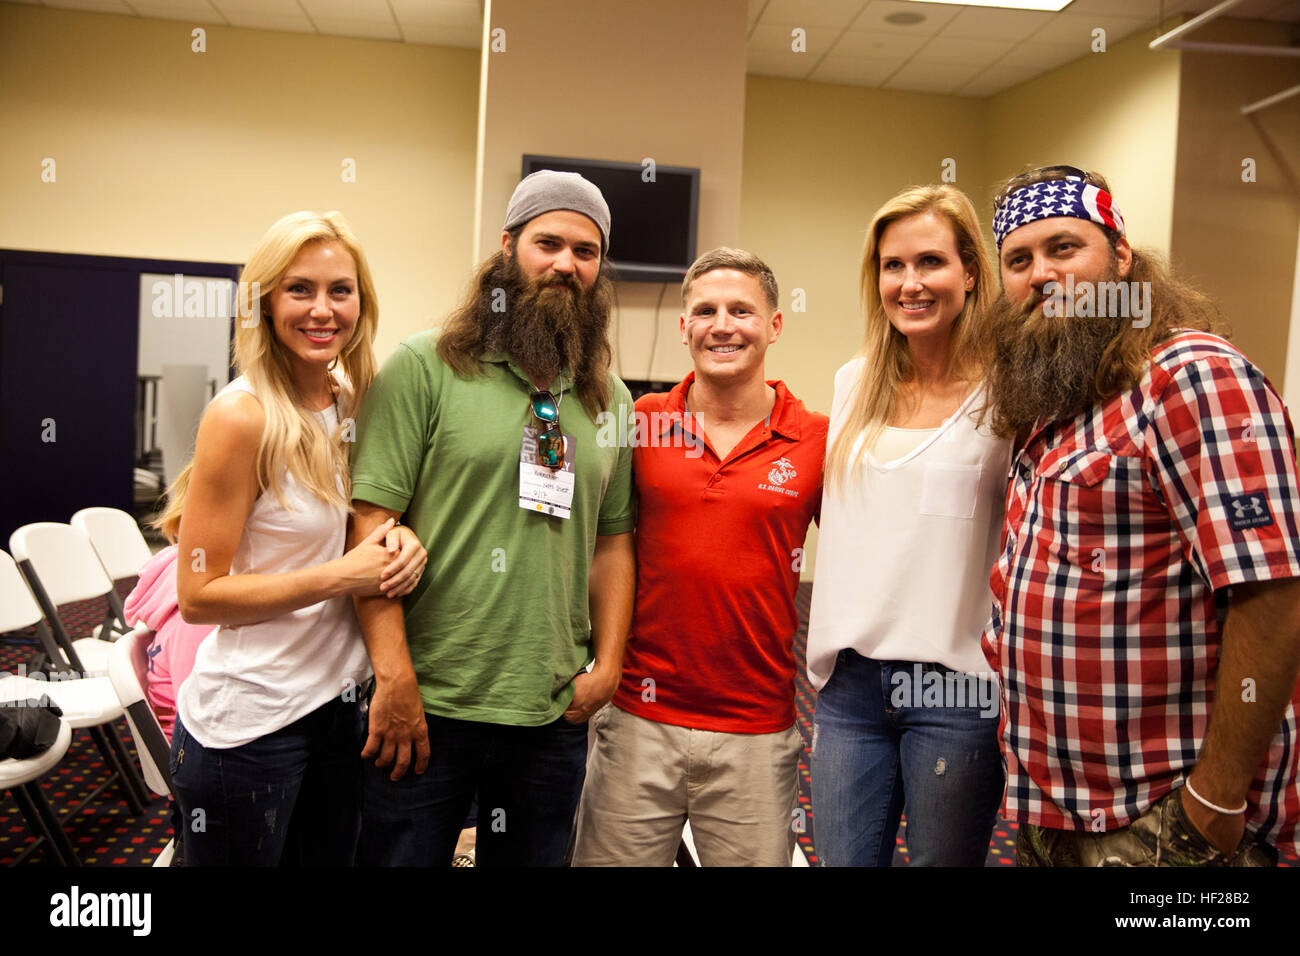 Retired U.S. Marine Corps Cpl. William Kyle Carpenter, center, poses for a photo with reality television stars Willie Robertson, right, and Jason Robertson, second from left, after attending a baseball game at Nationals Park in Washington, D.C., June 17, 2014. Carpenter will receive the Medal of Honor from the President of the United States Barack Obama during a ceremony at the White House on Thursday, June 19, 2014. (U.S. Marine Corps photo by Cpl. Michael C. Guinto/Released) Medal of Honor Kyle Carpenter 140617-M-LI307-452 Stock Photo